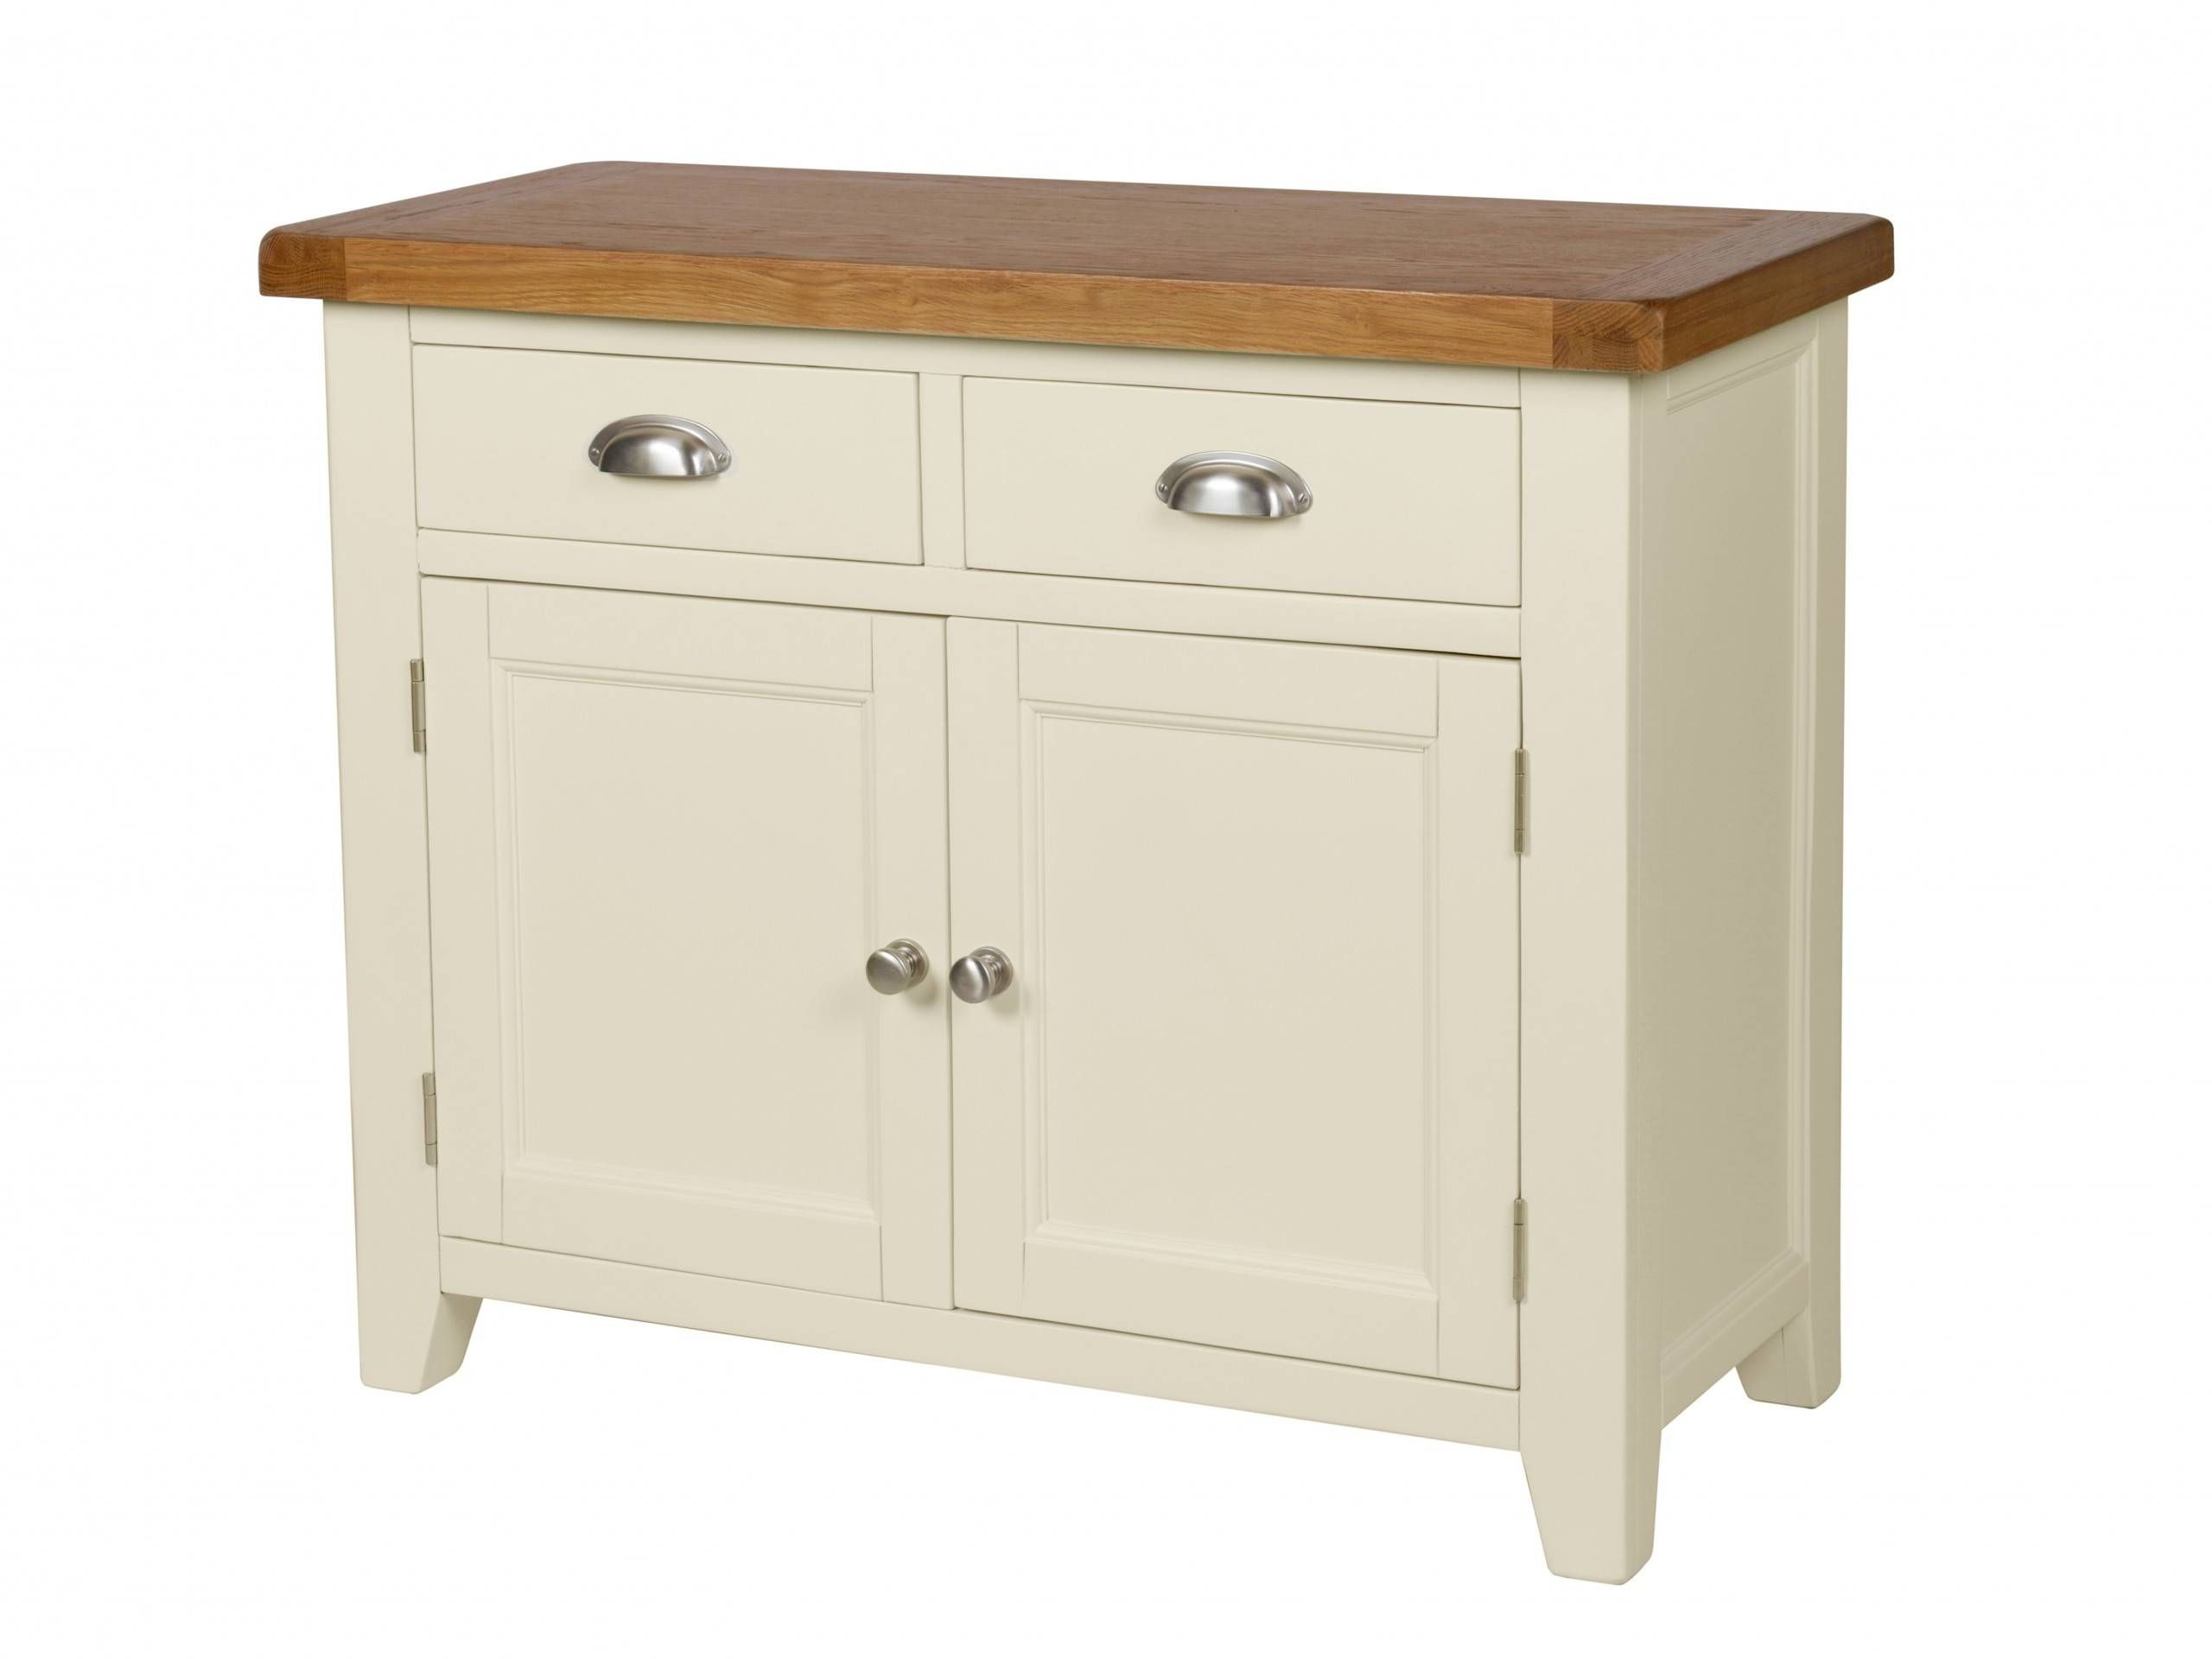 Country Cottage 100cm Cream Painted Oak Sideboard With Regard To Small Wooden Sideboards (View 5 of 15)